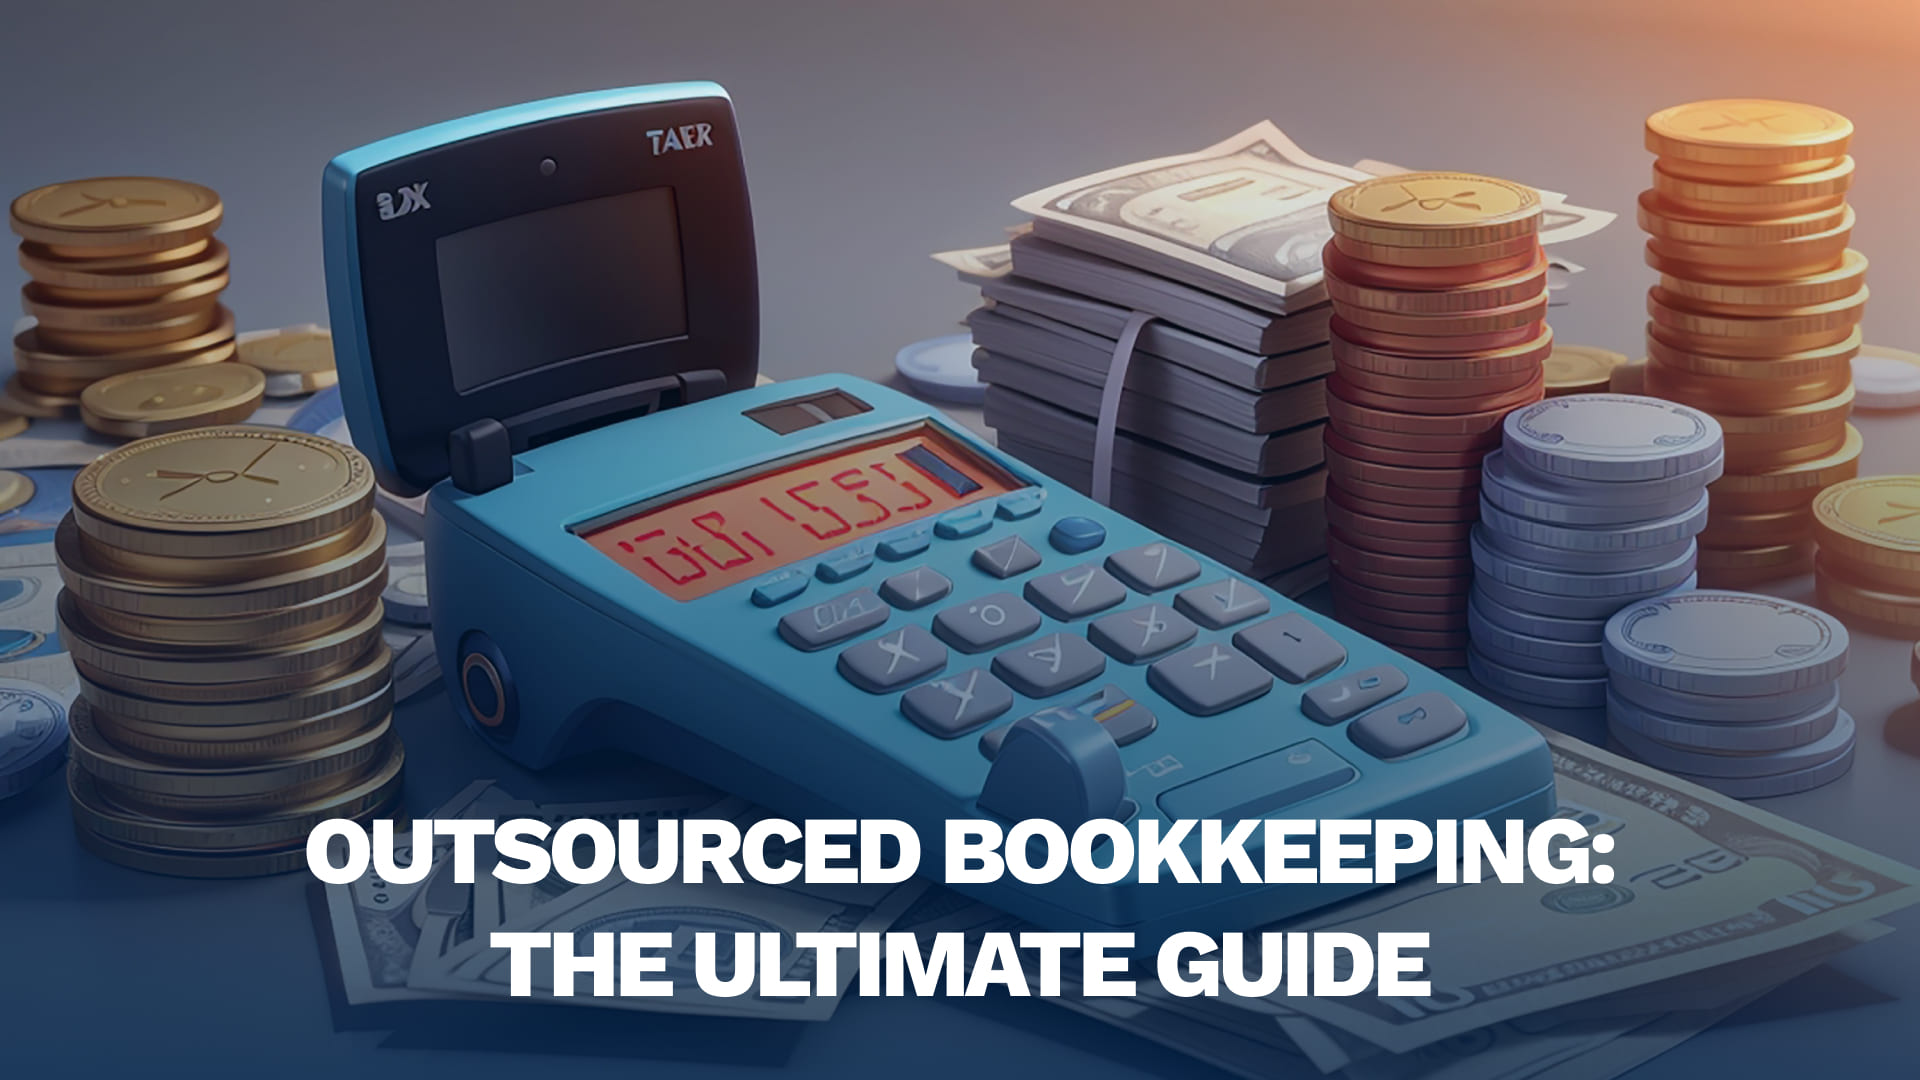 Outsourced Bookkeeping: The Ultimate Guide